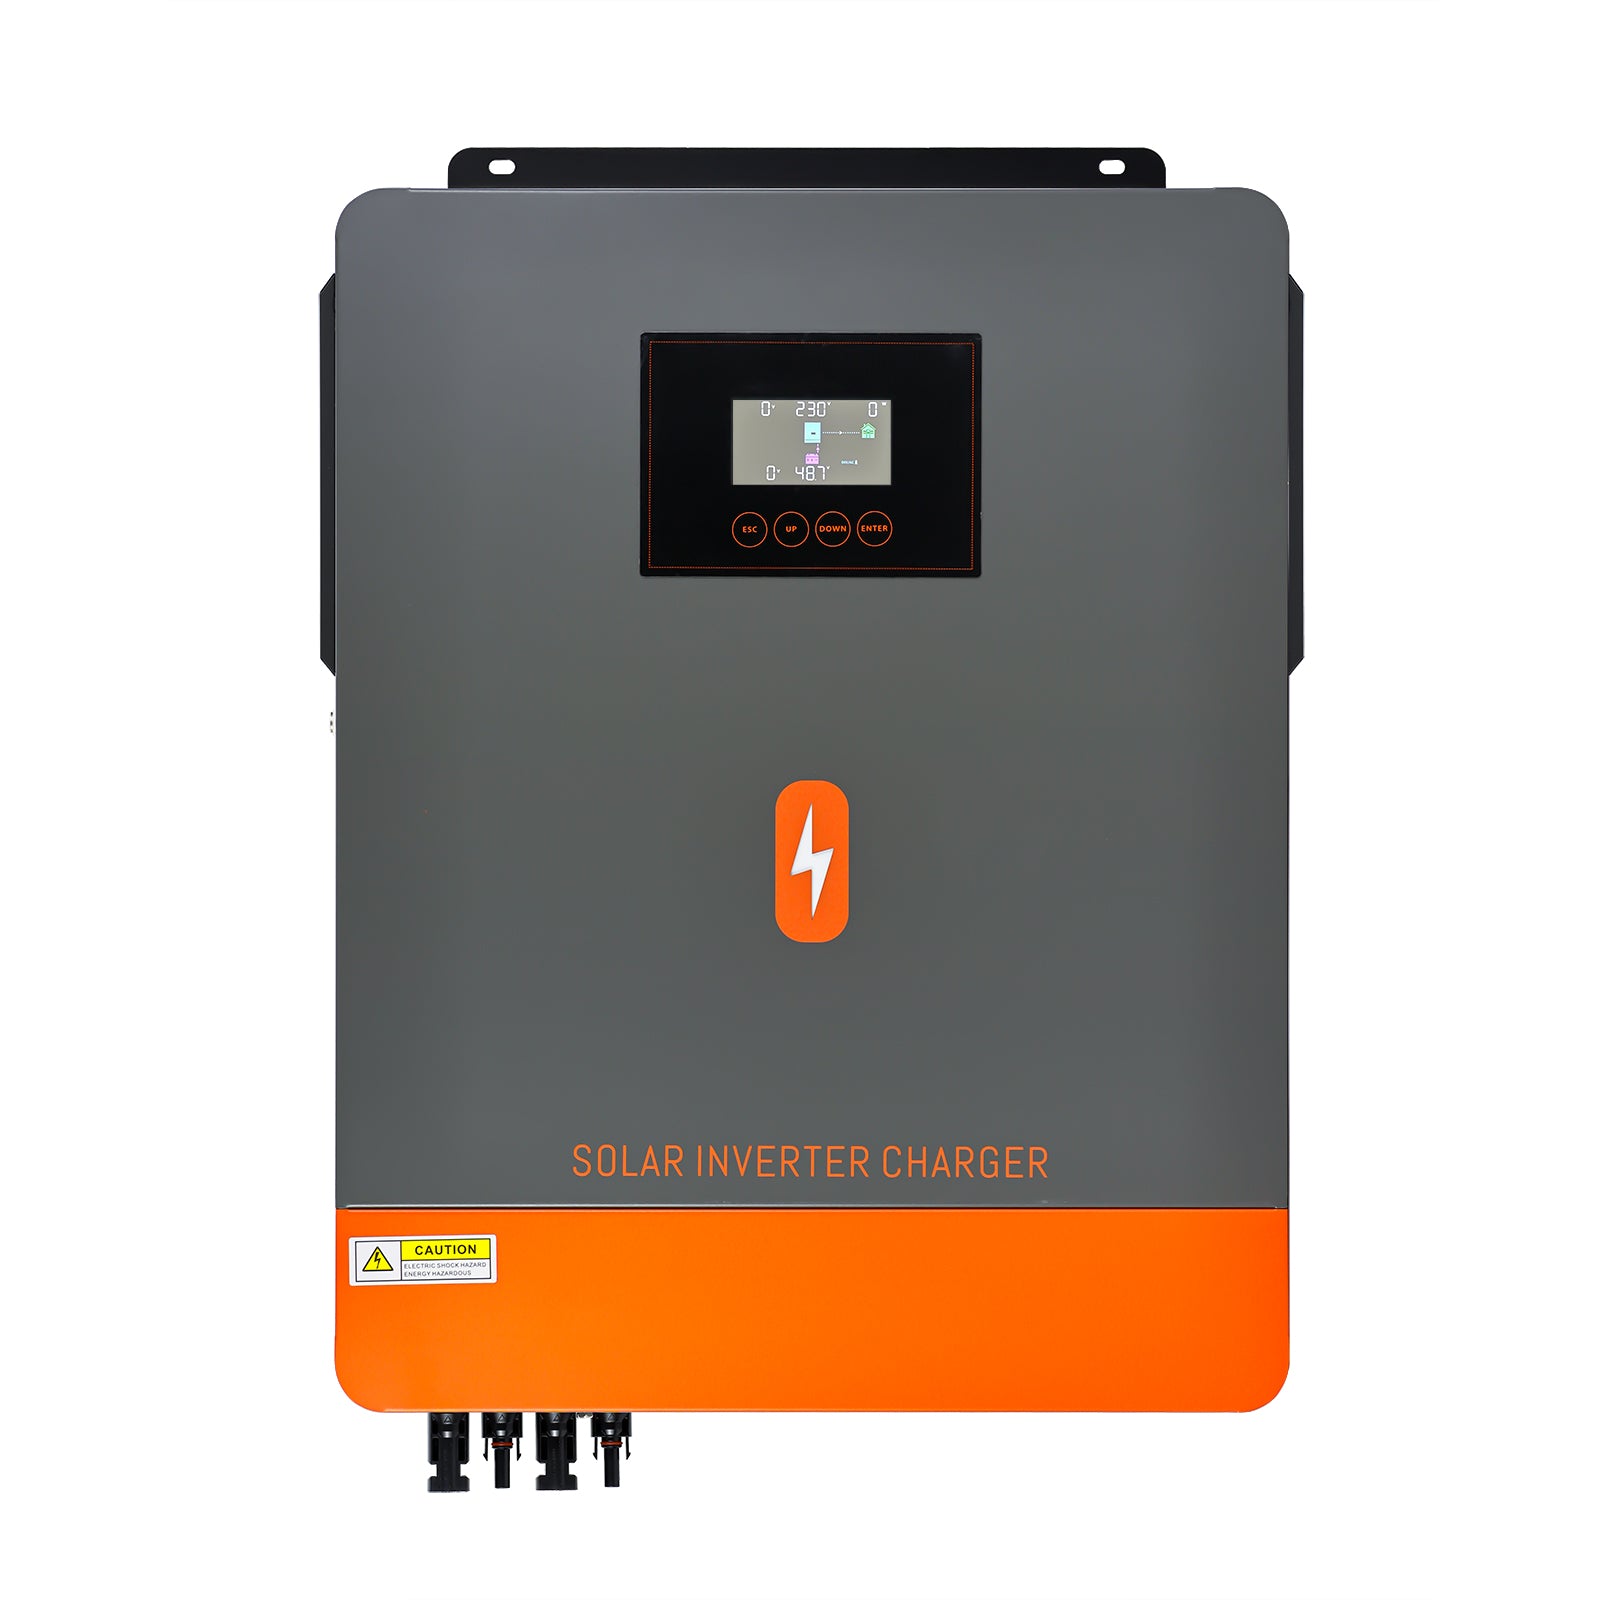 Off-grid system with a 20kWh battery and hybrid inverter in the 